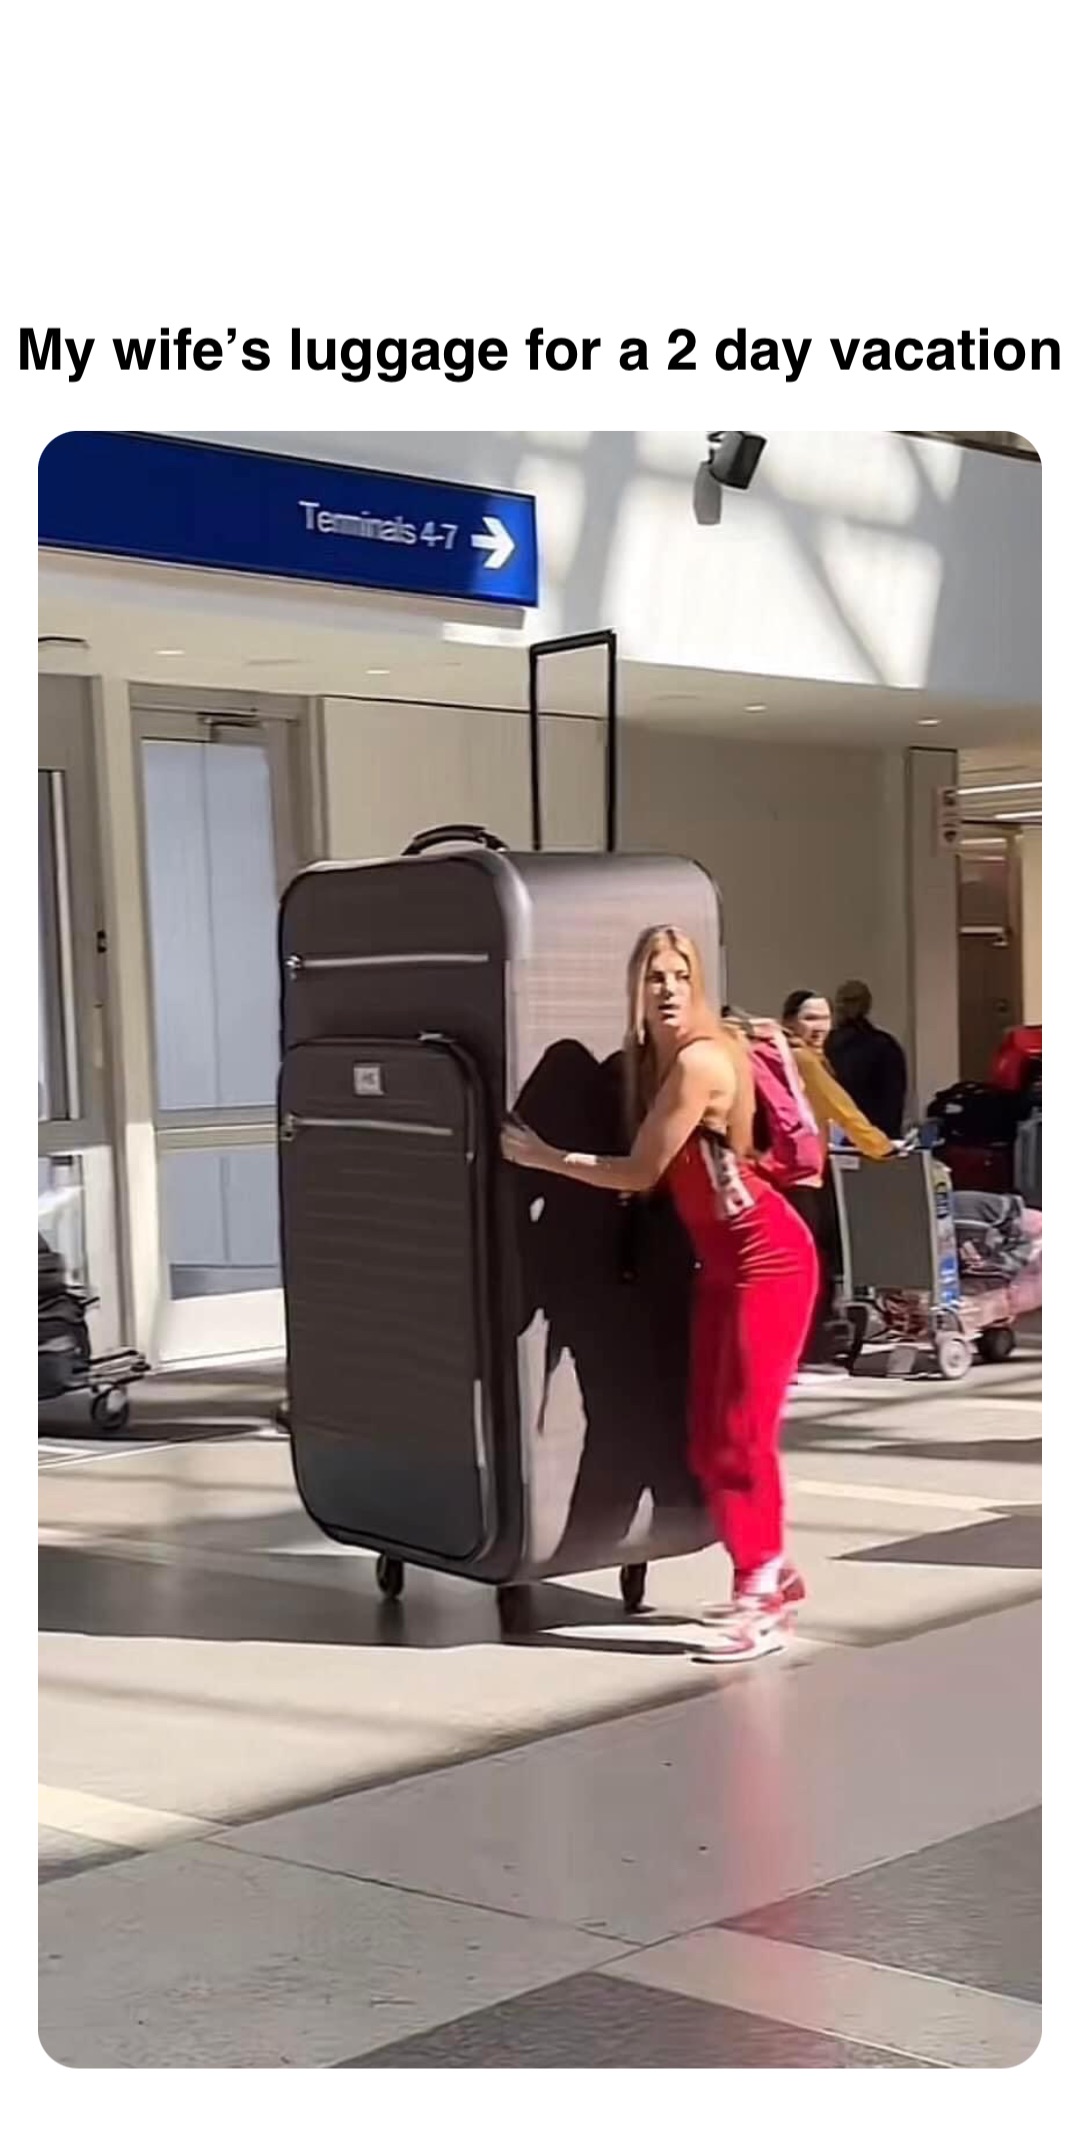 Double tap to edit My wife’s luggage for a 2 day vacation